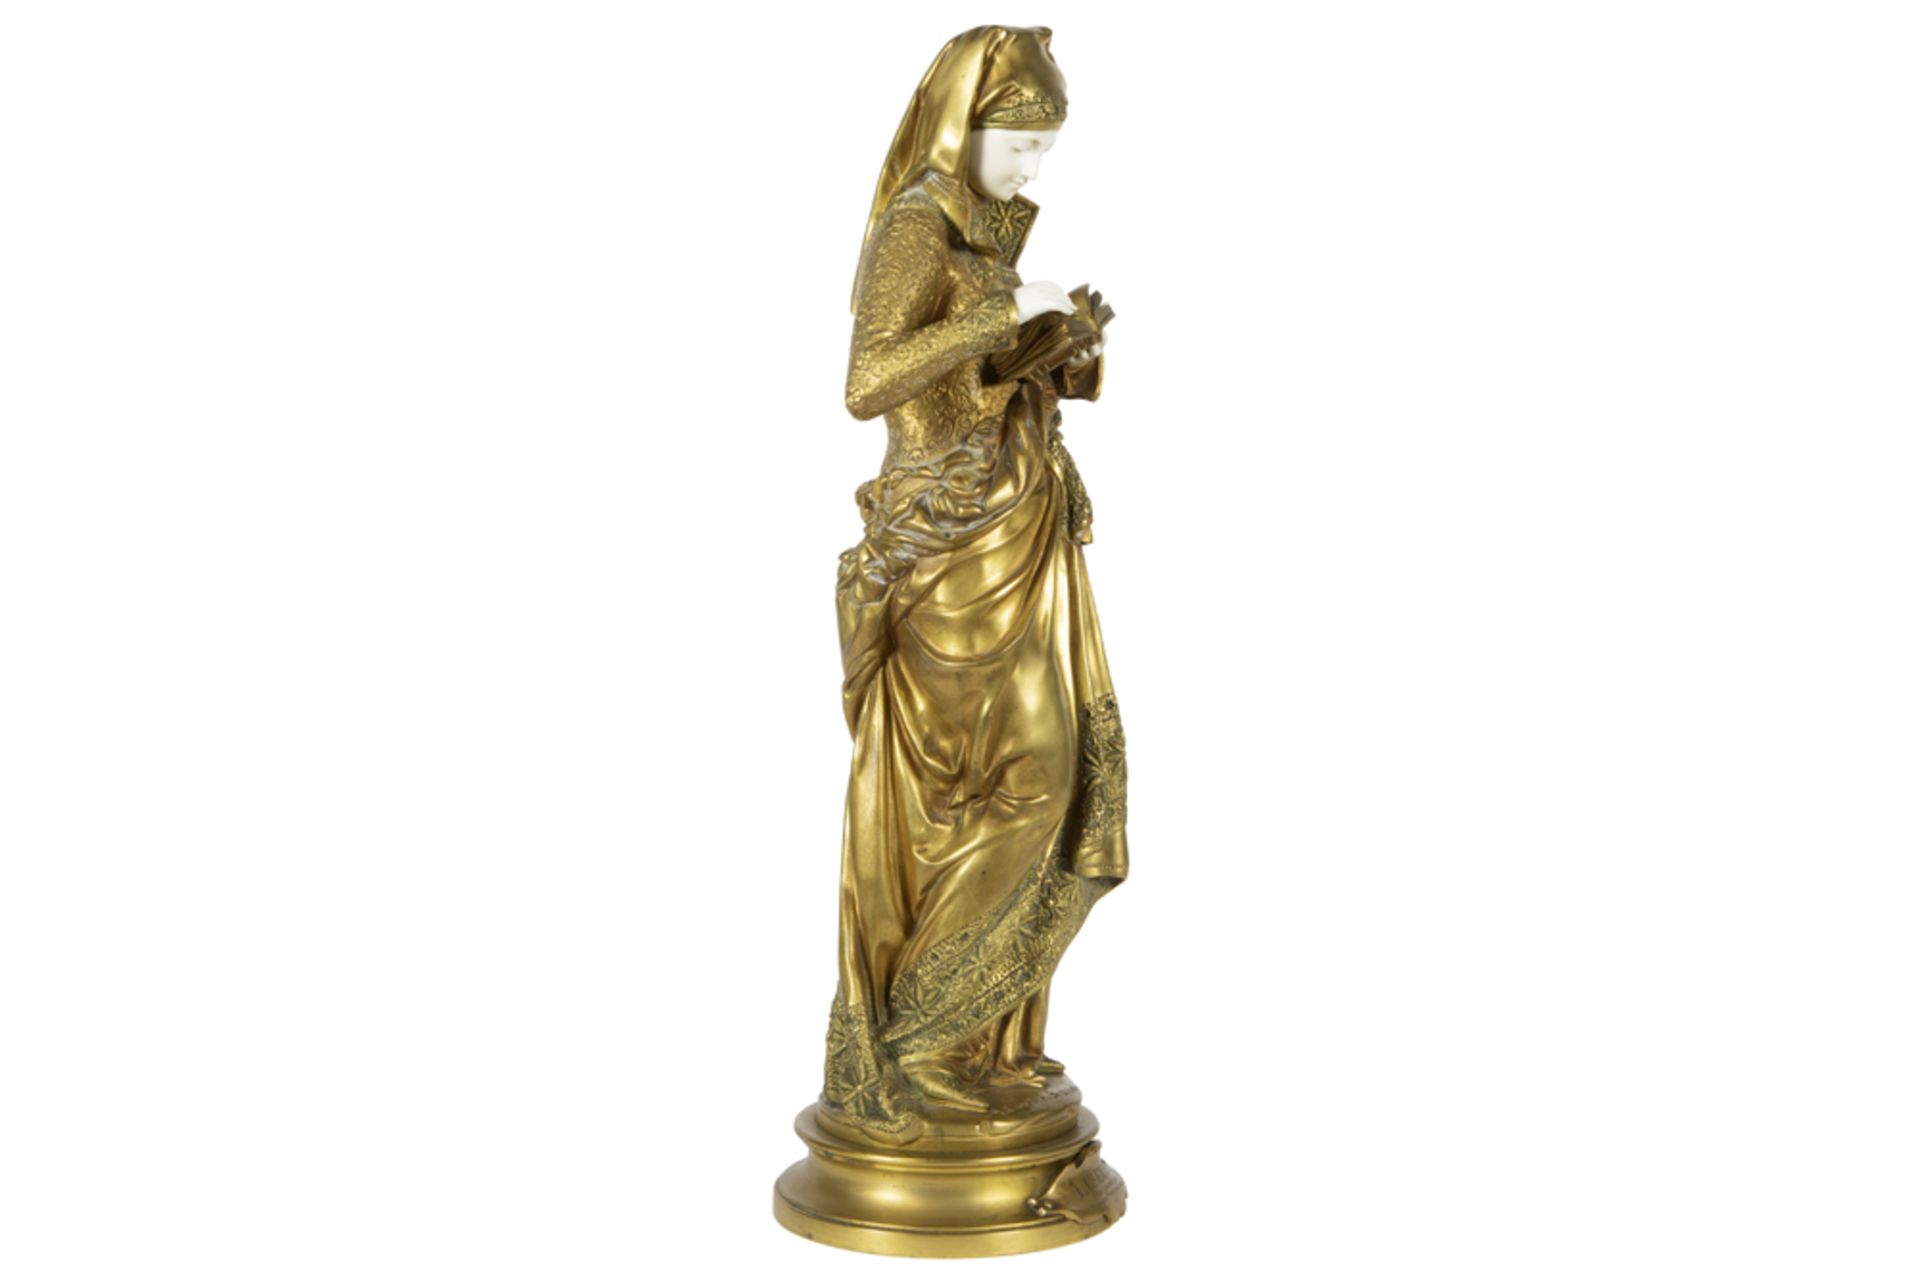 19th Cent.Carrier-Belleuse signed chryselephantine sculpture in gilded bronze and ivory - with - Image 3 of 7